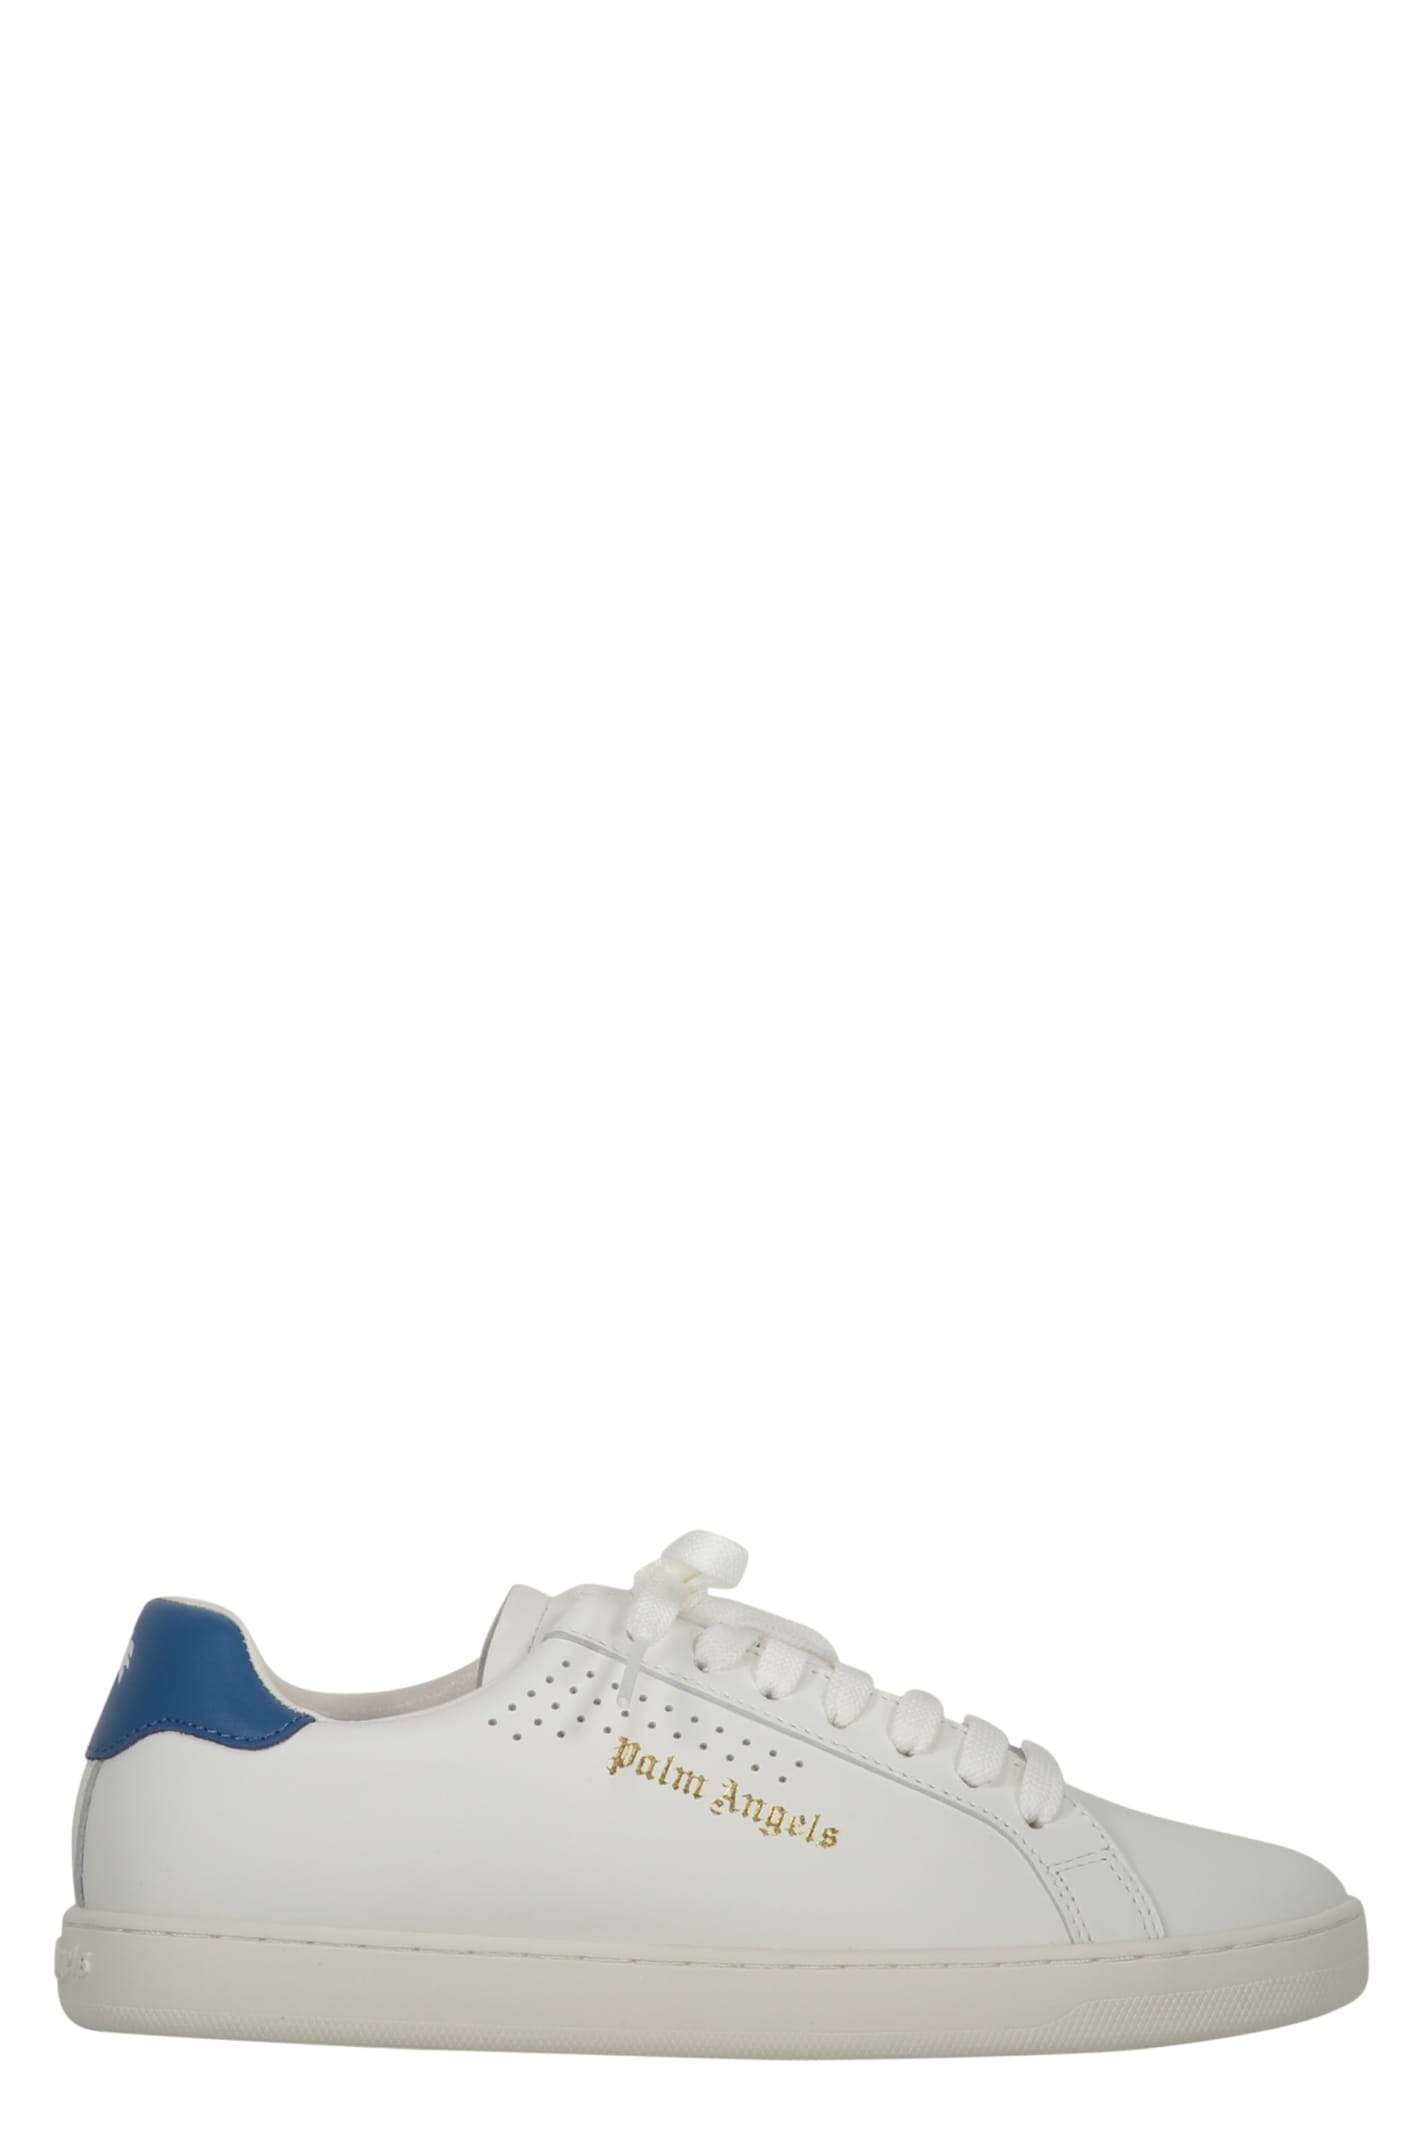 Palm Angels New Tennis Leather Sneakers